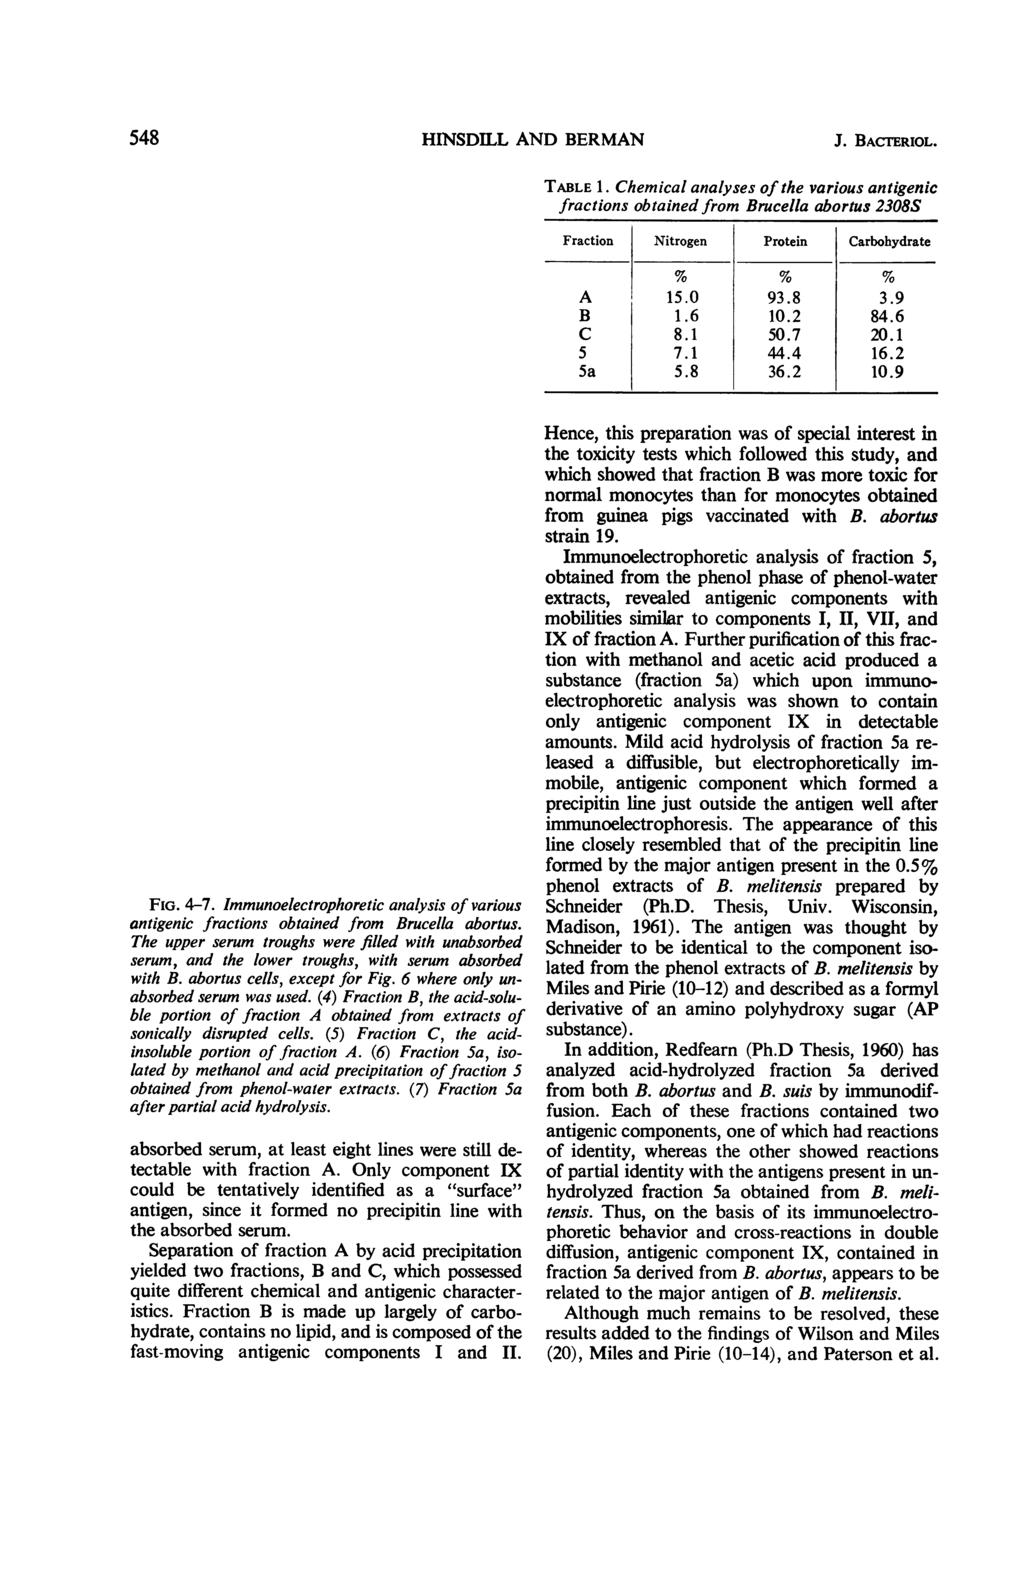 548 HINSDILL AND BERMAN J. BACTERIOL. TABLE 1. Chemical analyses of the various antigenic fractions obtained from Brucella abortus 2308S Fraction Nitrogen Protein Carbohydrate A 15.0 93.8 3.9 B 1.